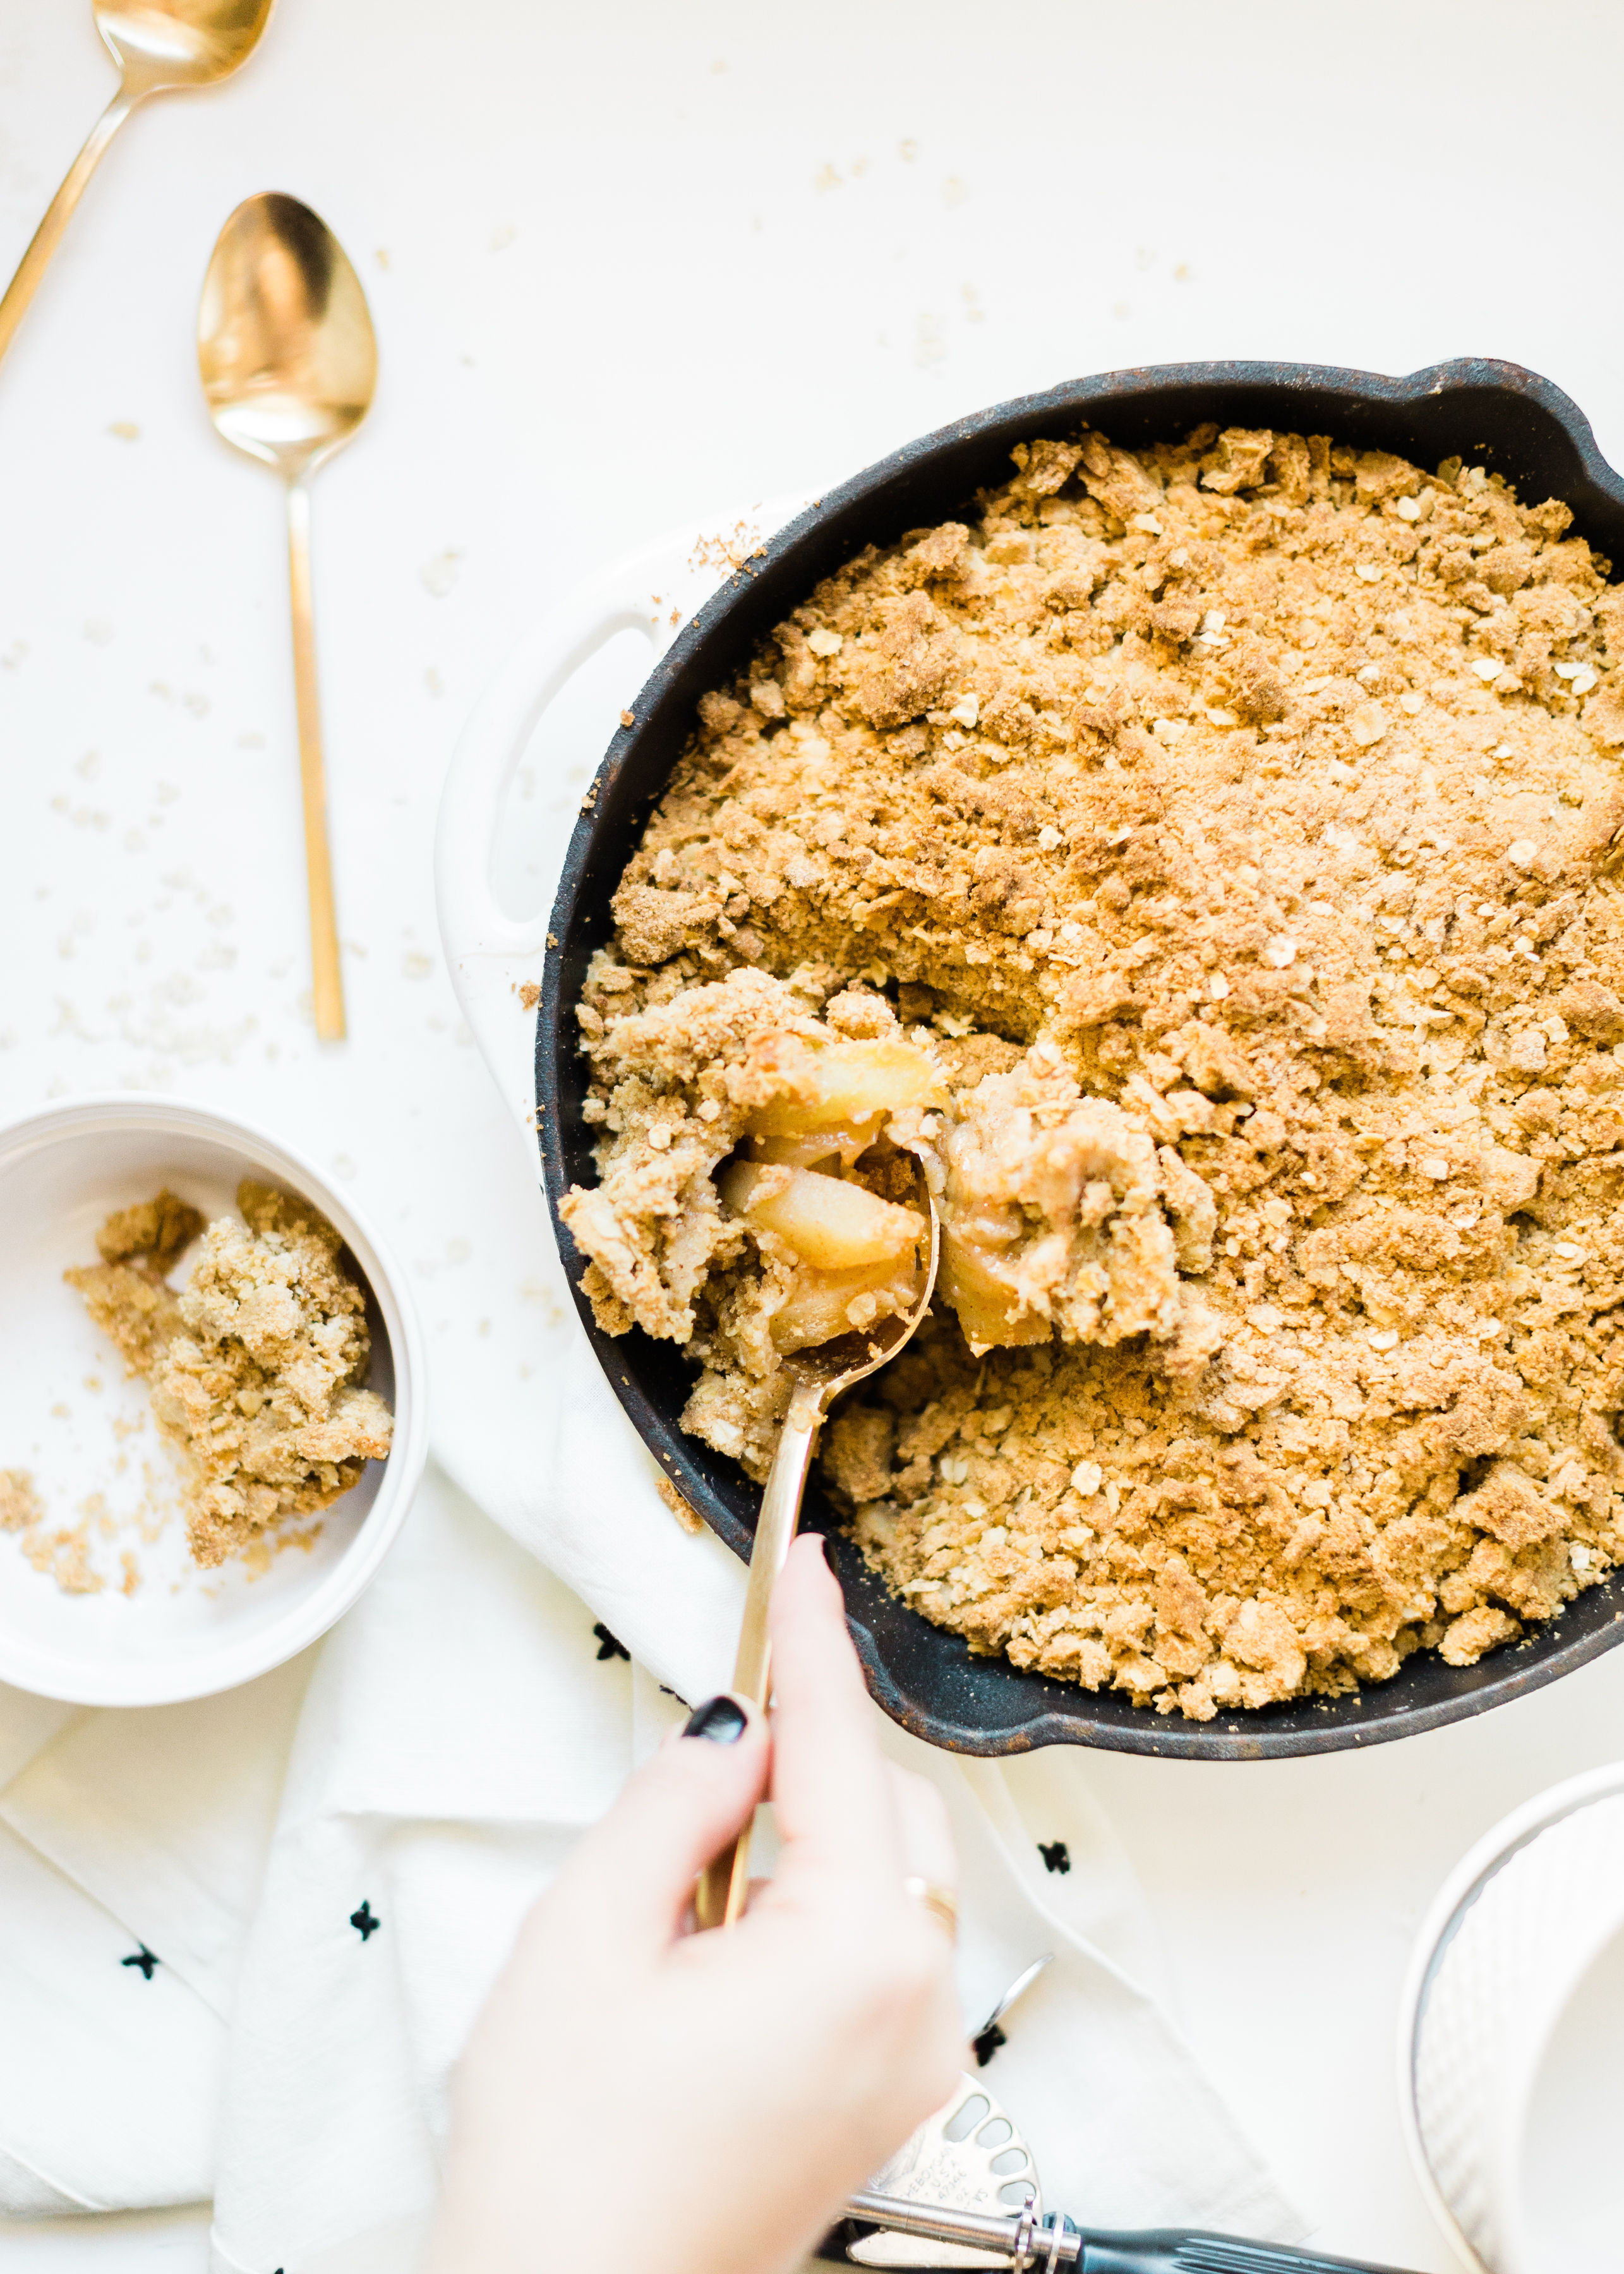 This amazing skillet apple crumble is filled with juicy apples baked into sticky, caramel-y, gooey perfection, and topped with a buttery crisp meets crumble topping that is decadently crumbly, a little bit doughy, with plenty of crunch. Click through for the #recipe. #crumble #crisp #applecrumble #applecrisp #fruitcrumble #fruitcrisp #dessert #skilletcrumble #skilletcrisp #skilletdessert | glitterinc.com | @glitterinc